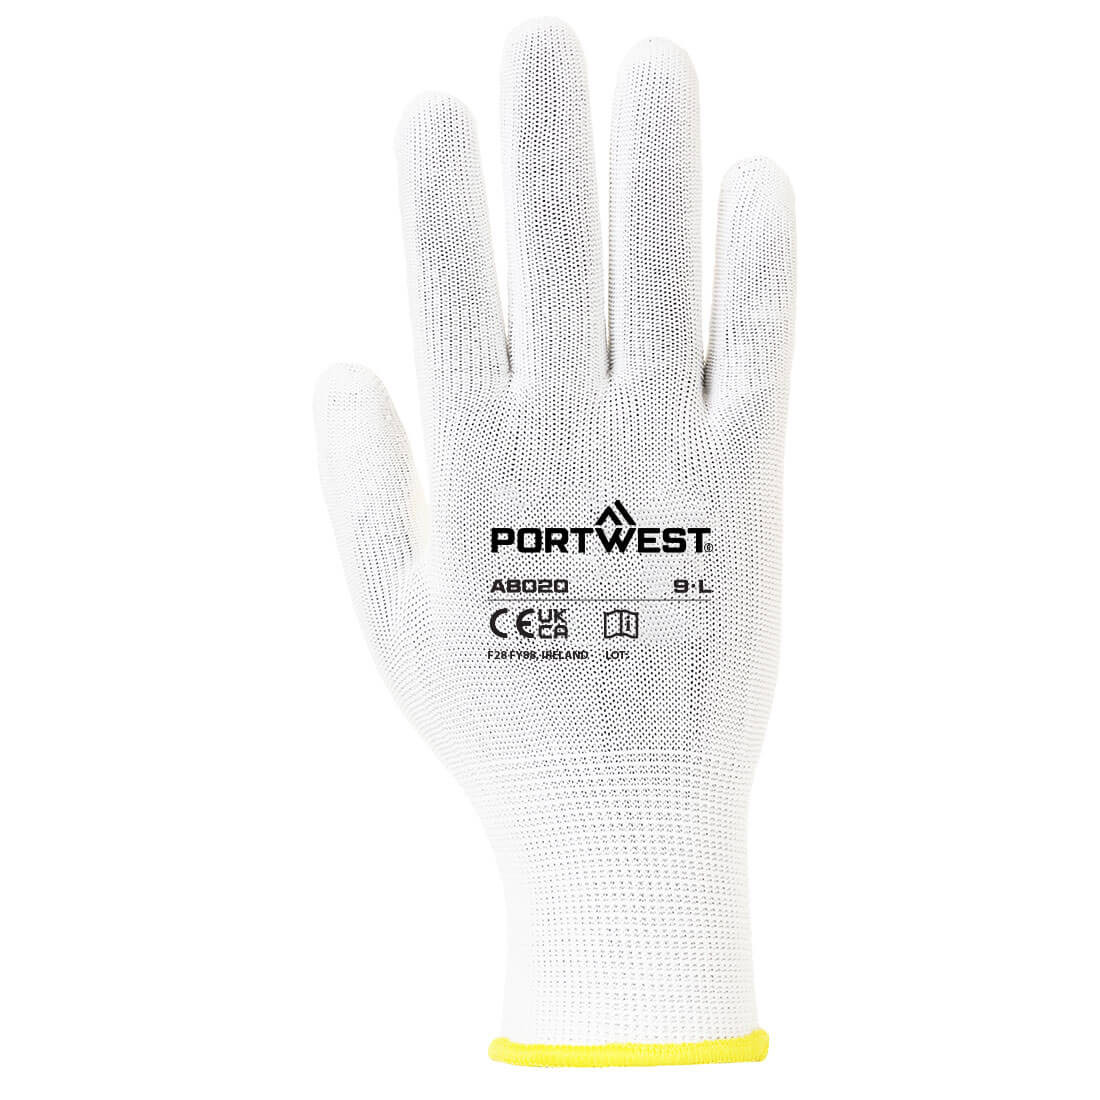 Assembly Glove (360 Pairs) - Personal protection